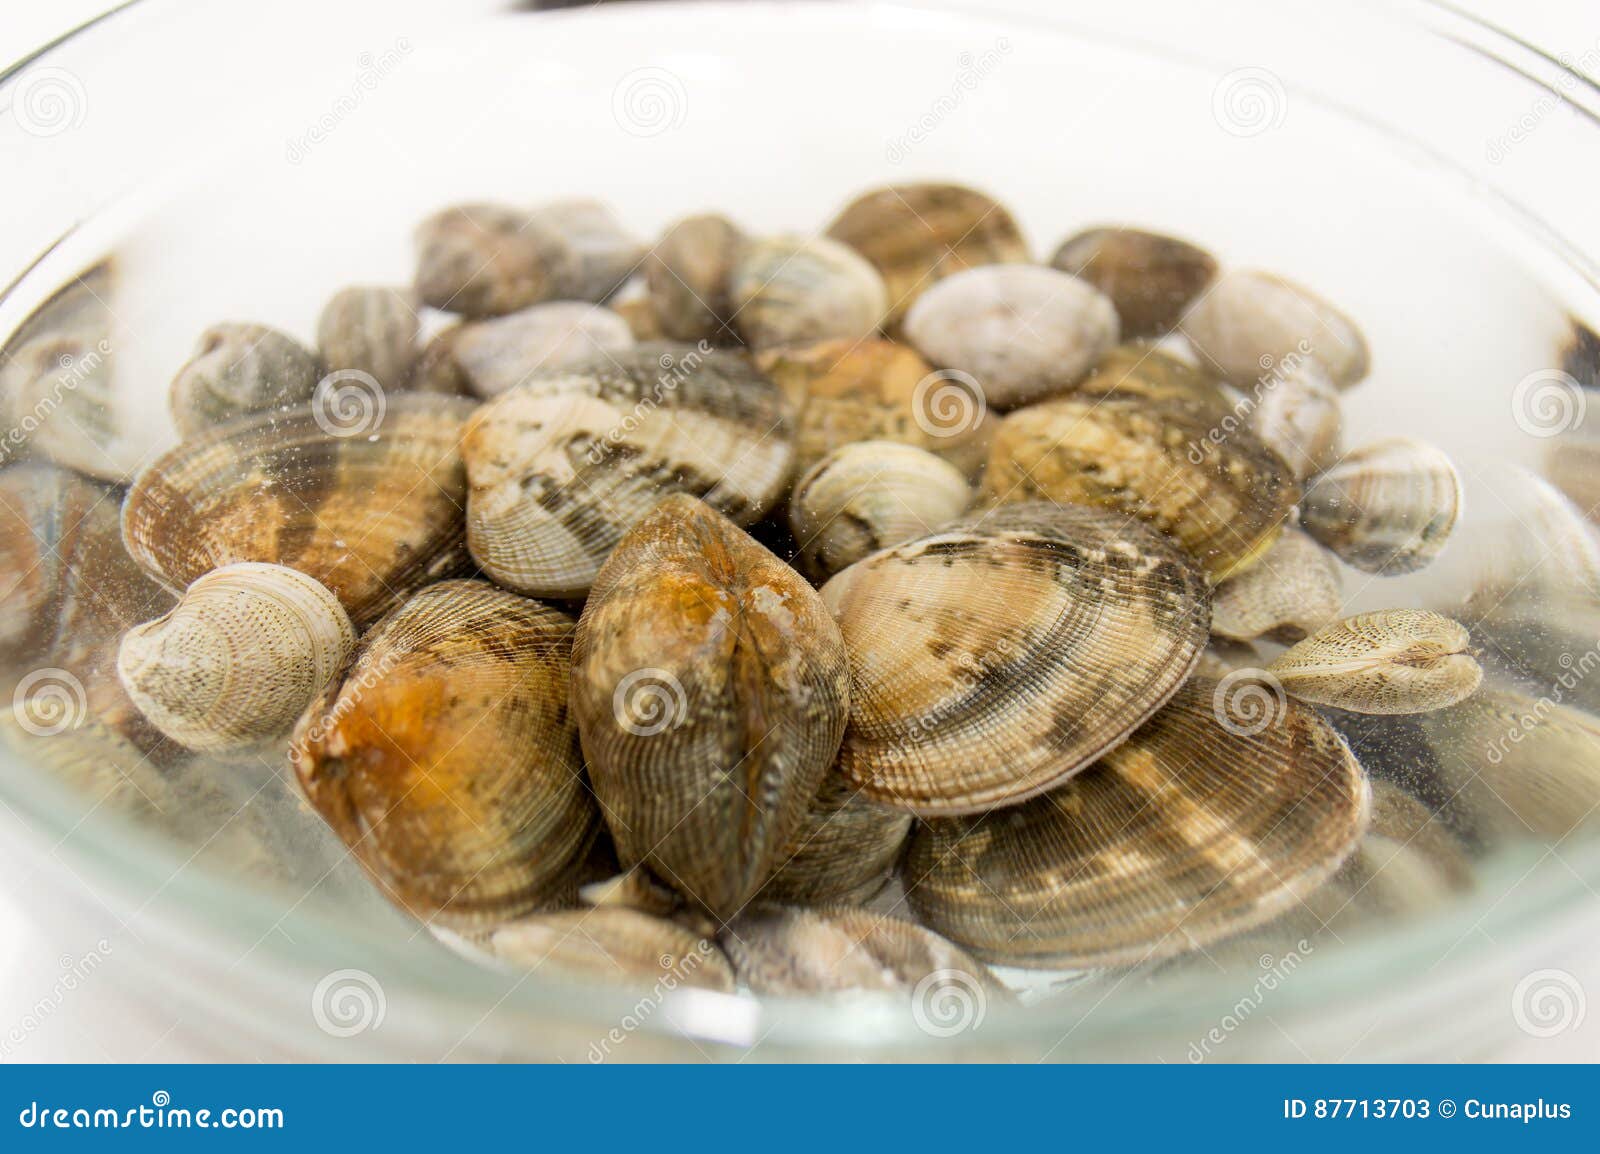 Fresh Raw Clams On Water With Salt Stock Image - Image of ...